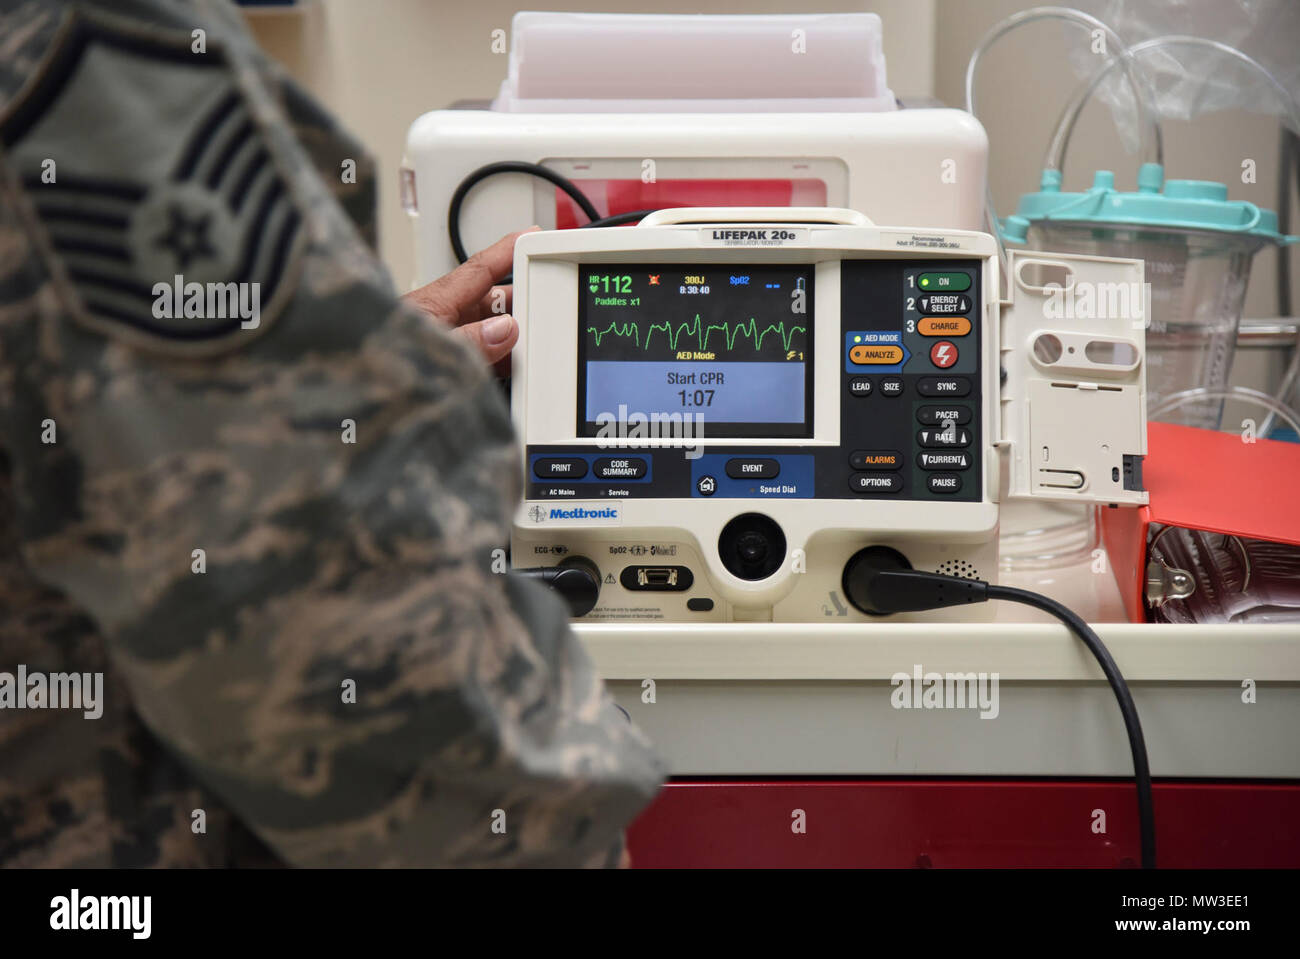 Master Sgt. Juan Diaz, 81st Medical Operations Squadron medical technician, operates a defibrillator during Code Blue Thursday in the Keesler Medical Center emergency room April 27, 2017, on Keesler Air Force Base, Miss. Emergency room staff members coordinated with the simulation lab to use human patient simulators for running various advanced cardiac life support scenarios to improve Keesler’s new medical technicians’ skills and get them familiar with emergency equipment. Stock Photo